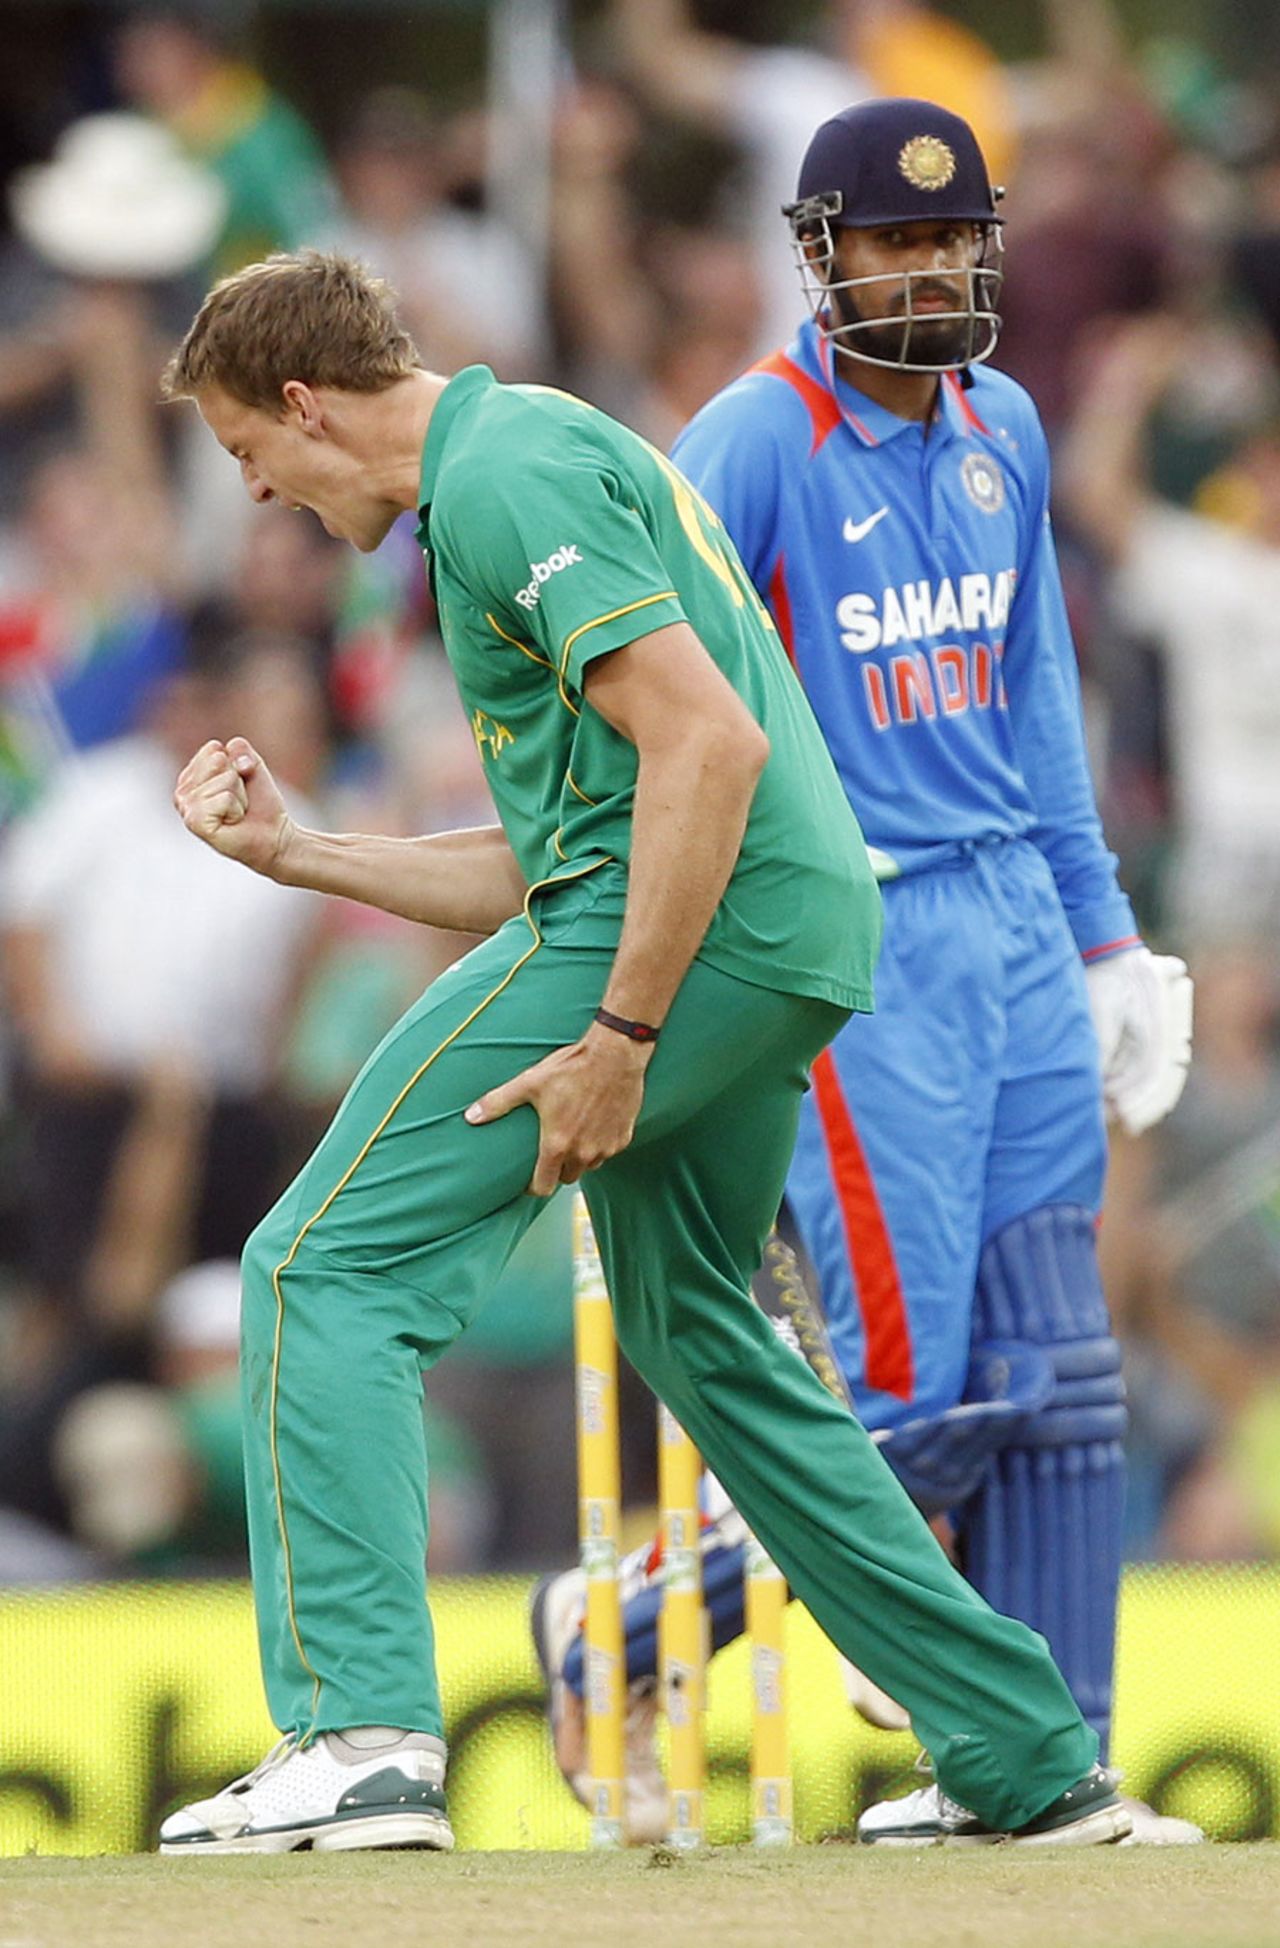 Morne Morkel finally ends Yusuf Pathan's monstrous hitting, South Africa v India, 5th ODI, Centurion, January 23, 2011